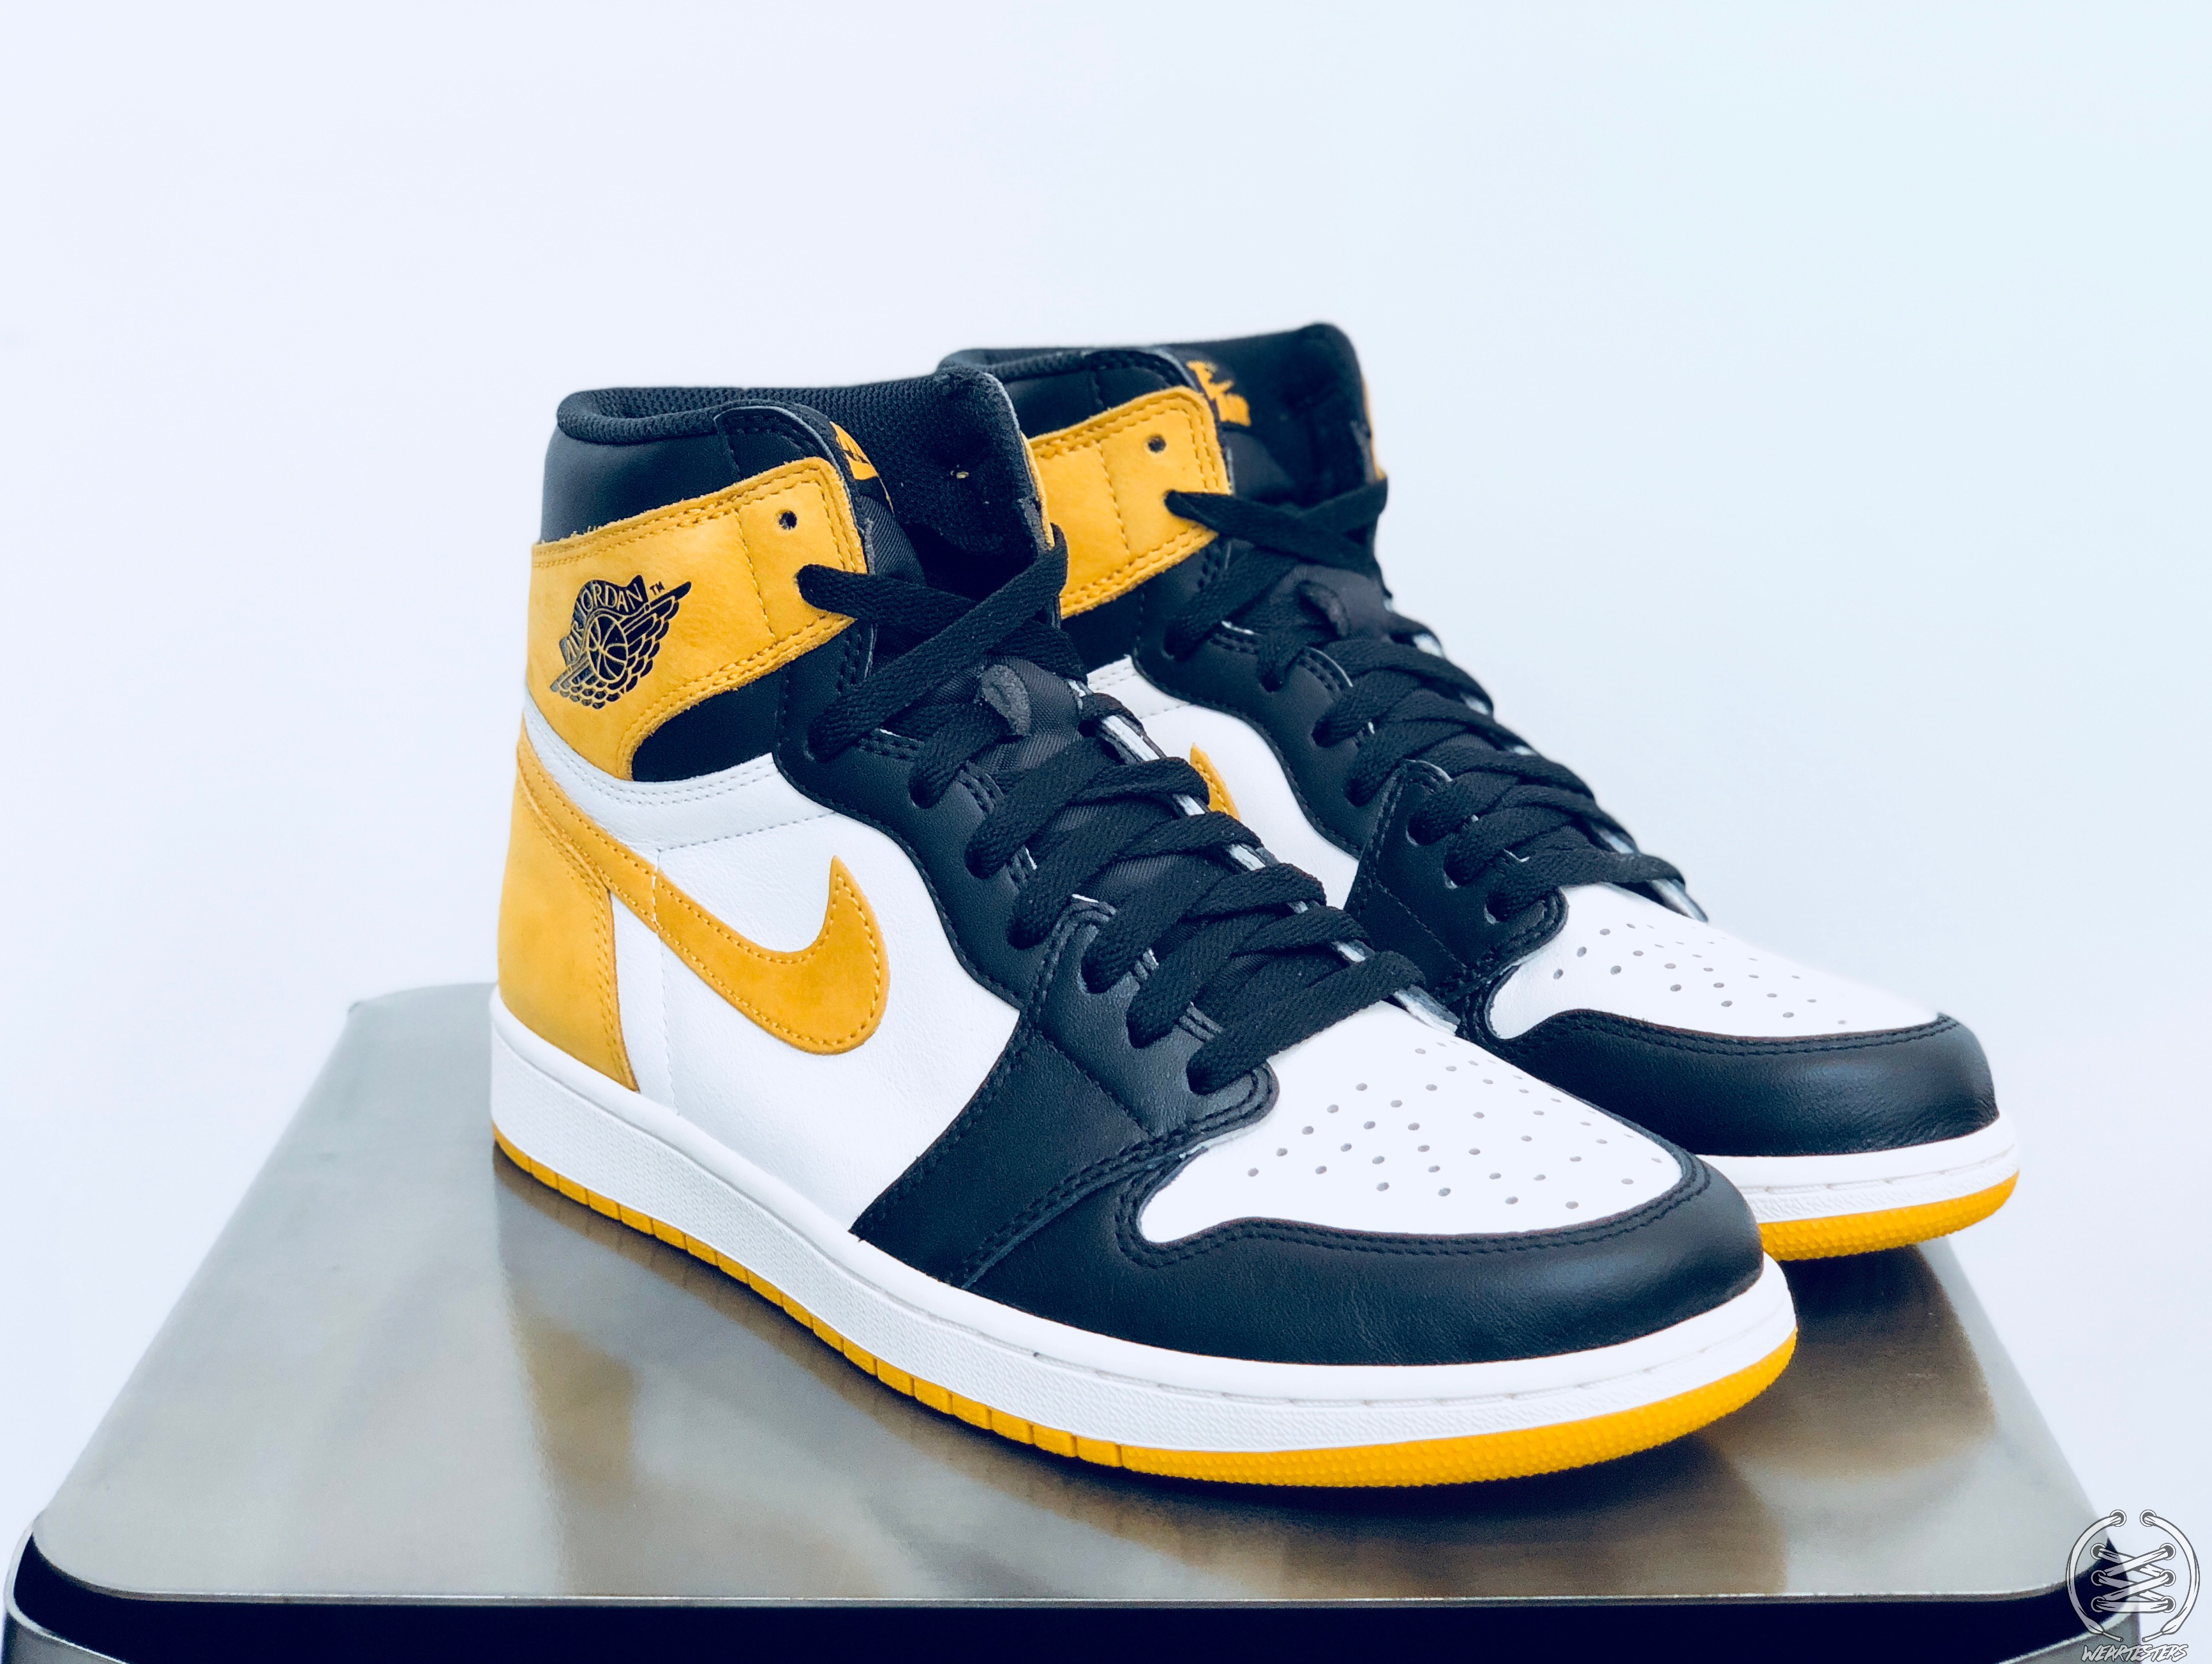 Air Jordan 1 Yellow Ochre Best Hand in the Game collection 4